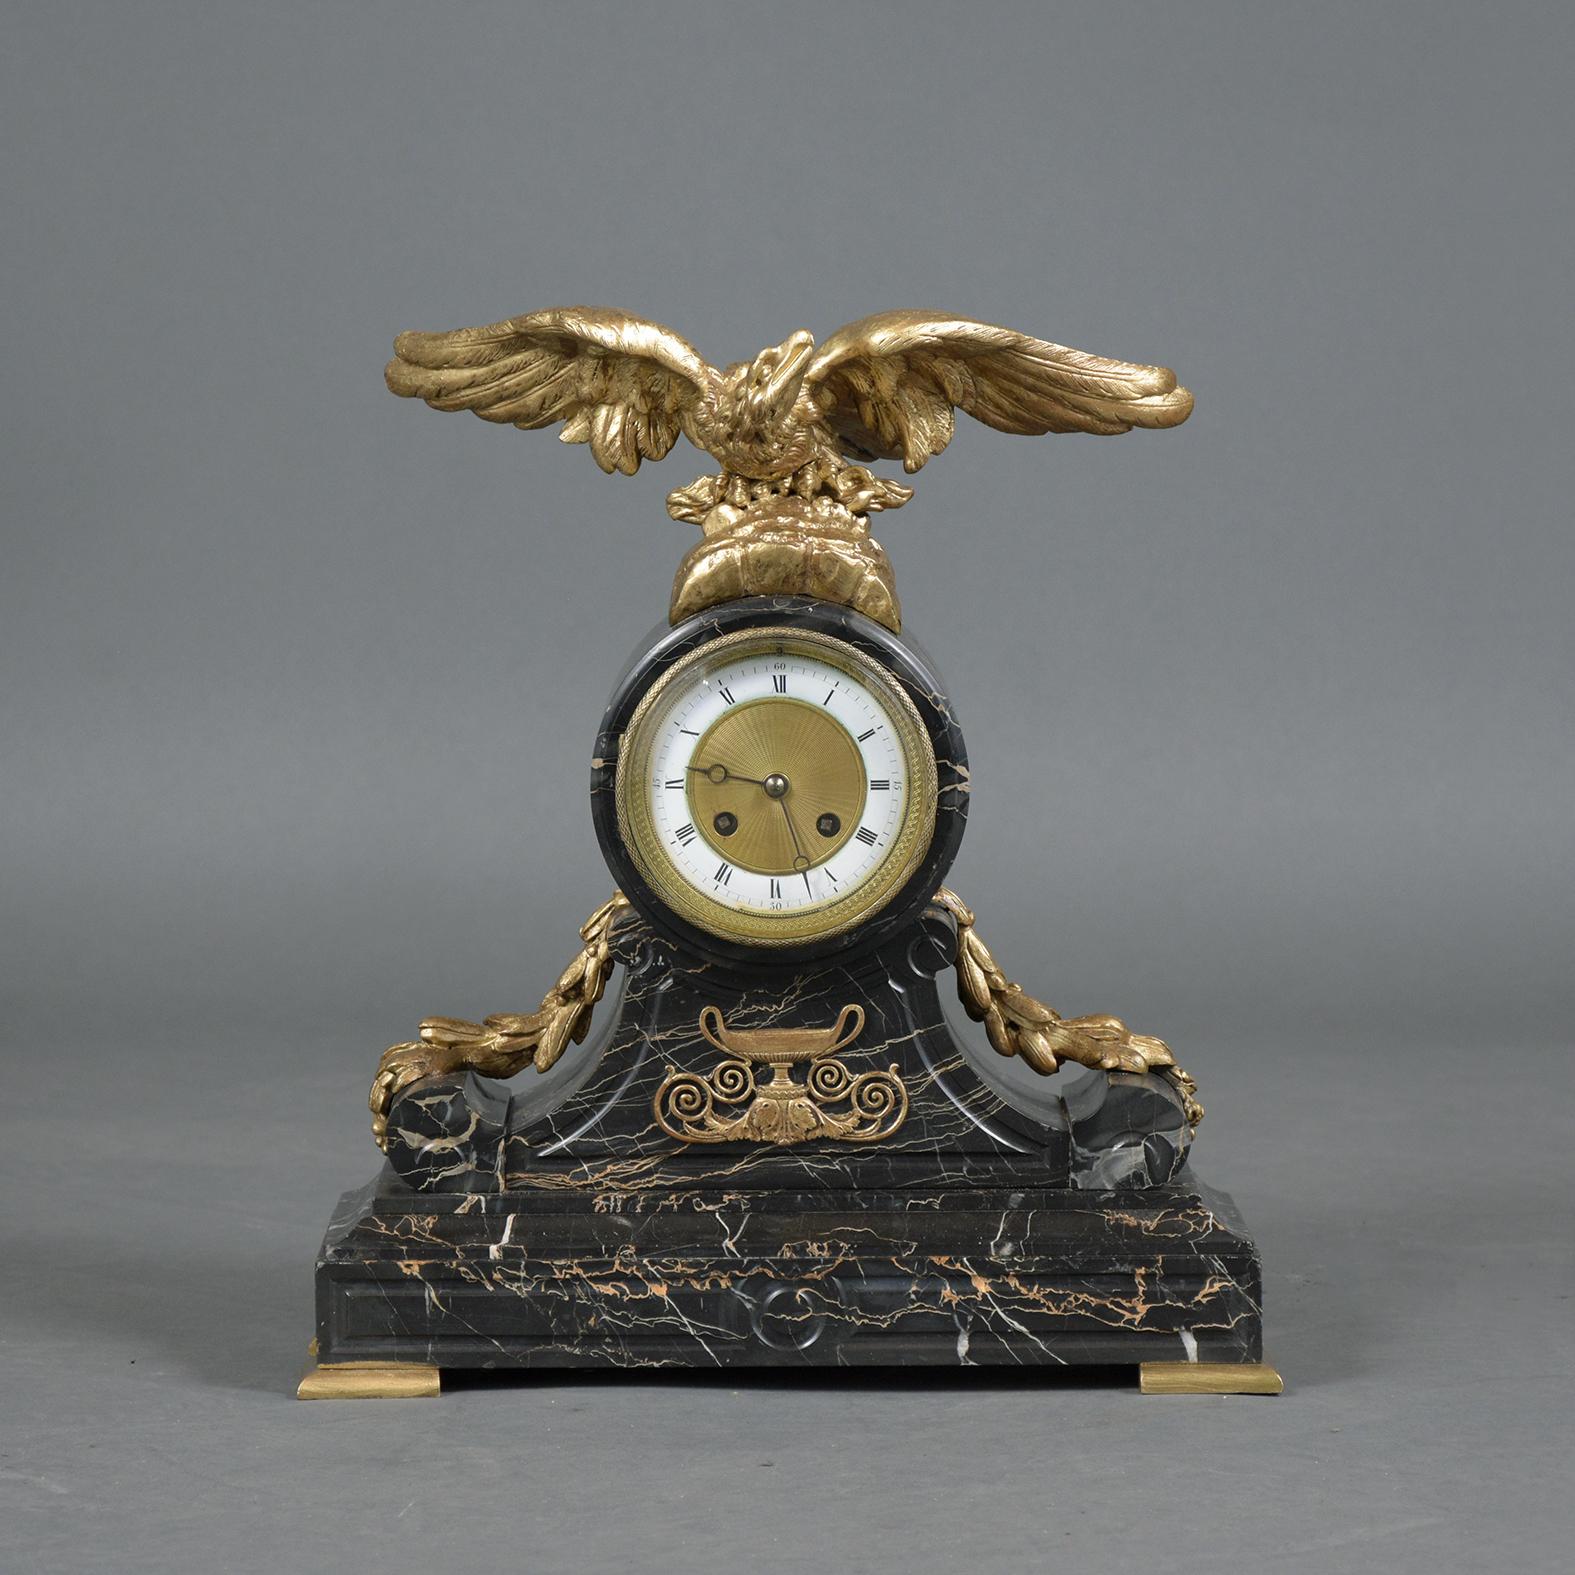 An extraordinary French 19th-century empire mantle clock, in working condition and beautifully crafted out of bronze and marble. This antique mantle clock is ready to be used and displayed for years to come.